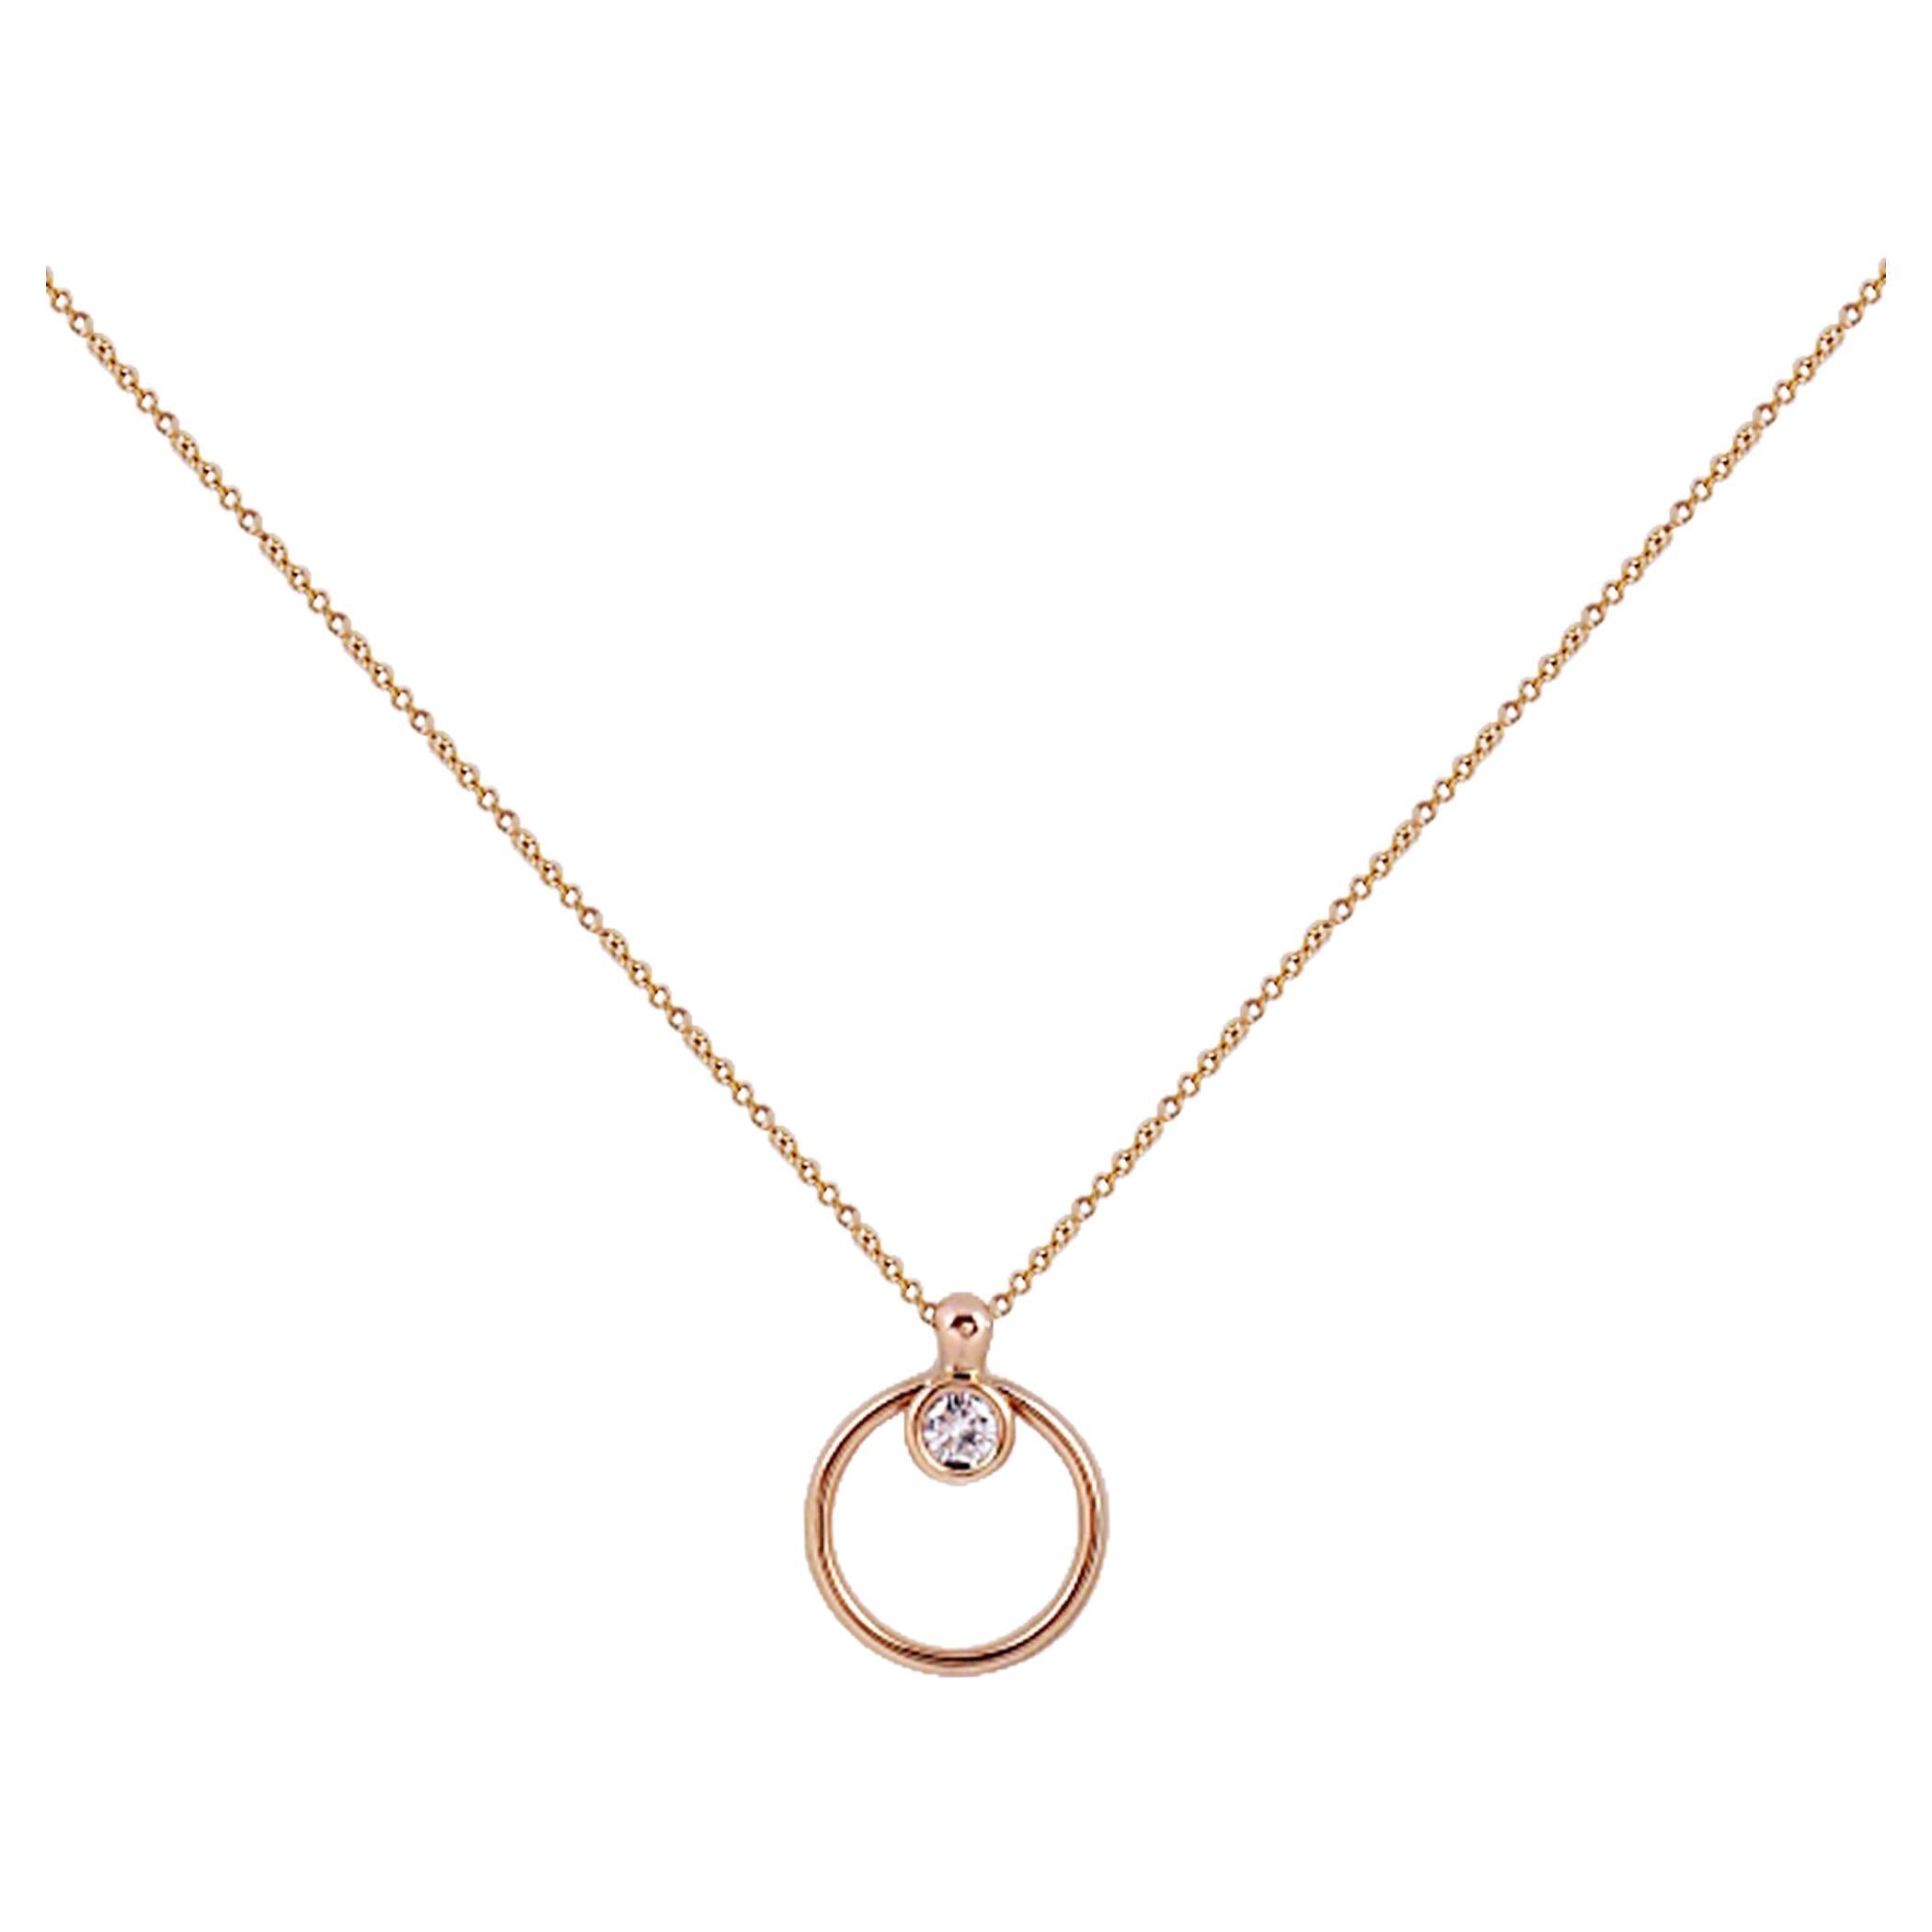 Nari Fine Jewels Circle Necklace with Bezel Set Diamond in 14k Yellow For Sale